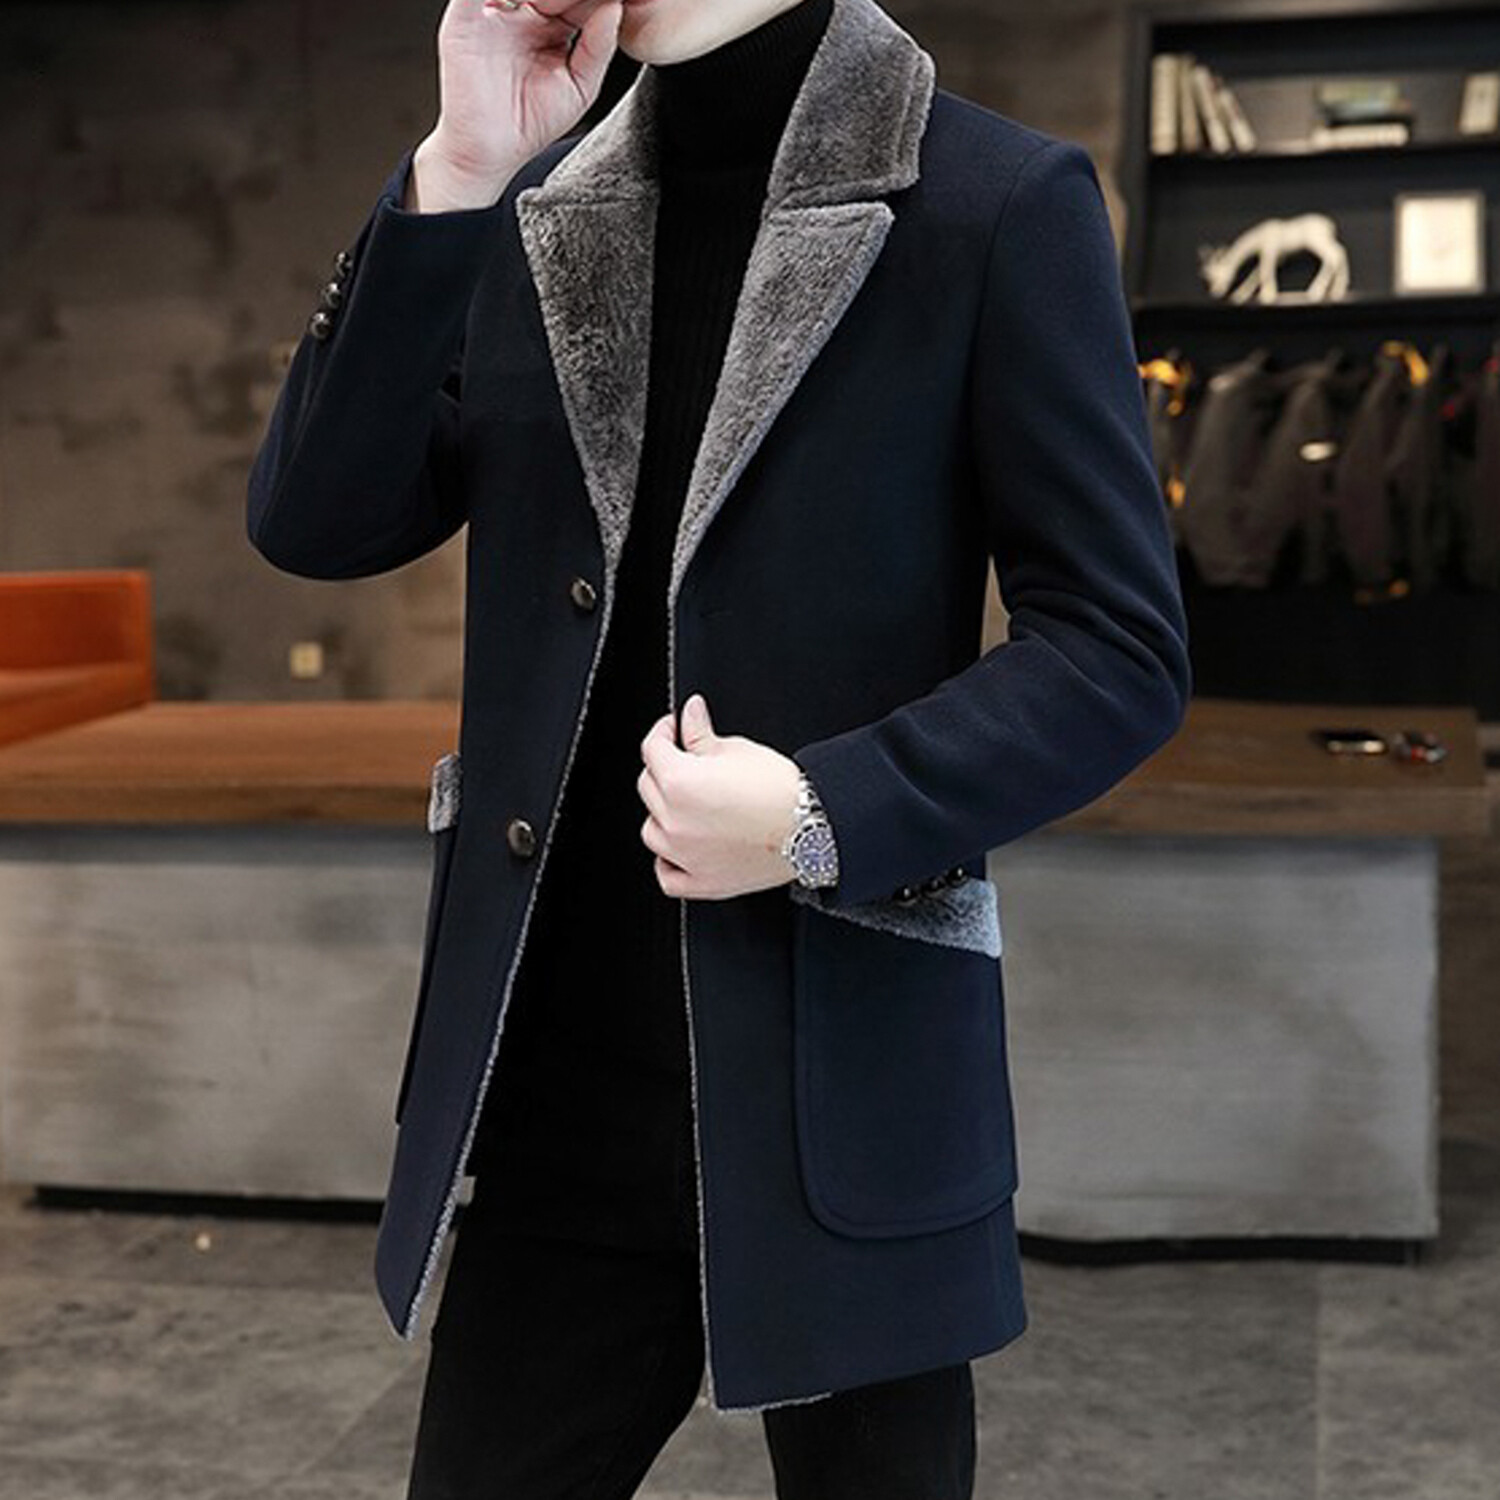 D3229-Navy-Blue // Coat (S) - RVHSWDS Jackets + Coats - Touch of Modern